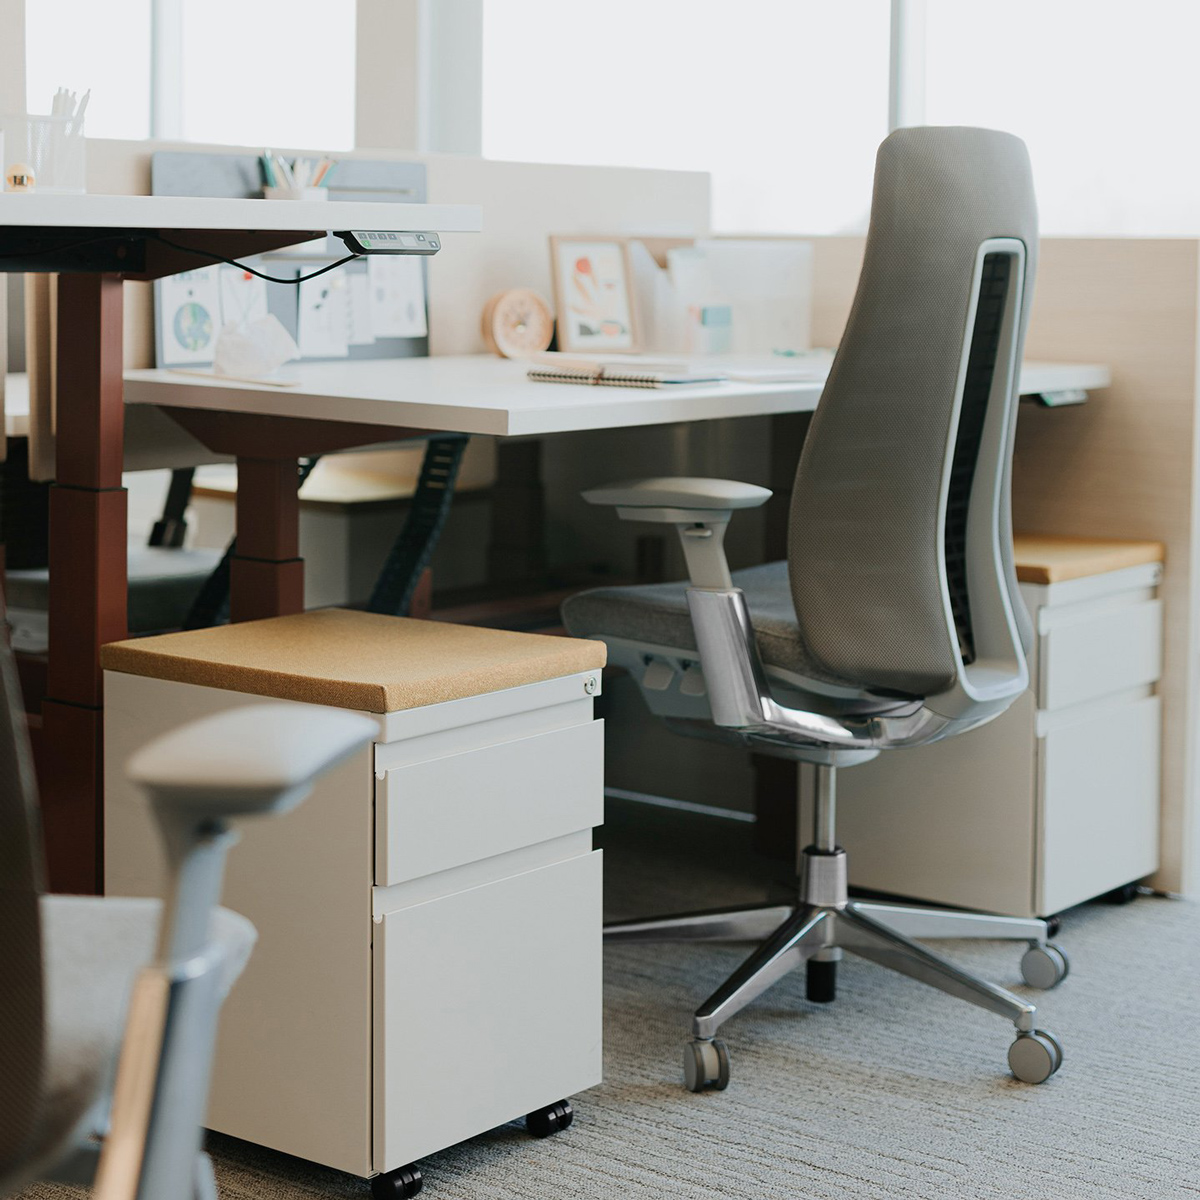 Office chair at a desk with two small filing cabinets | About Us